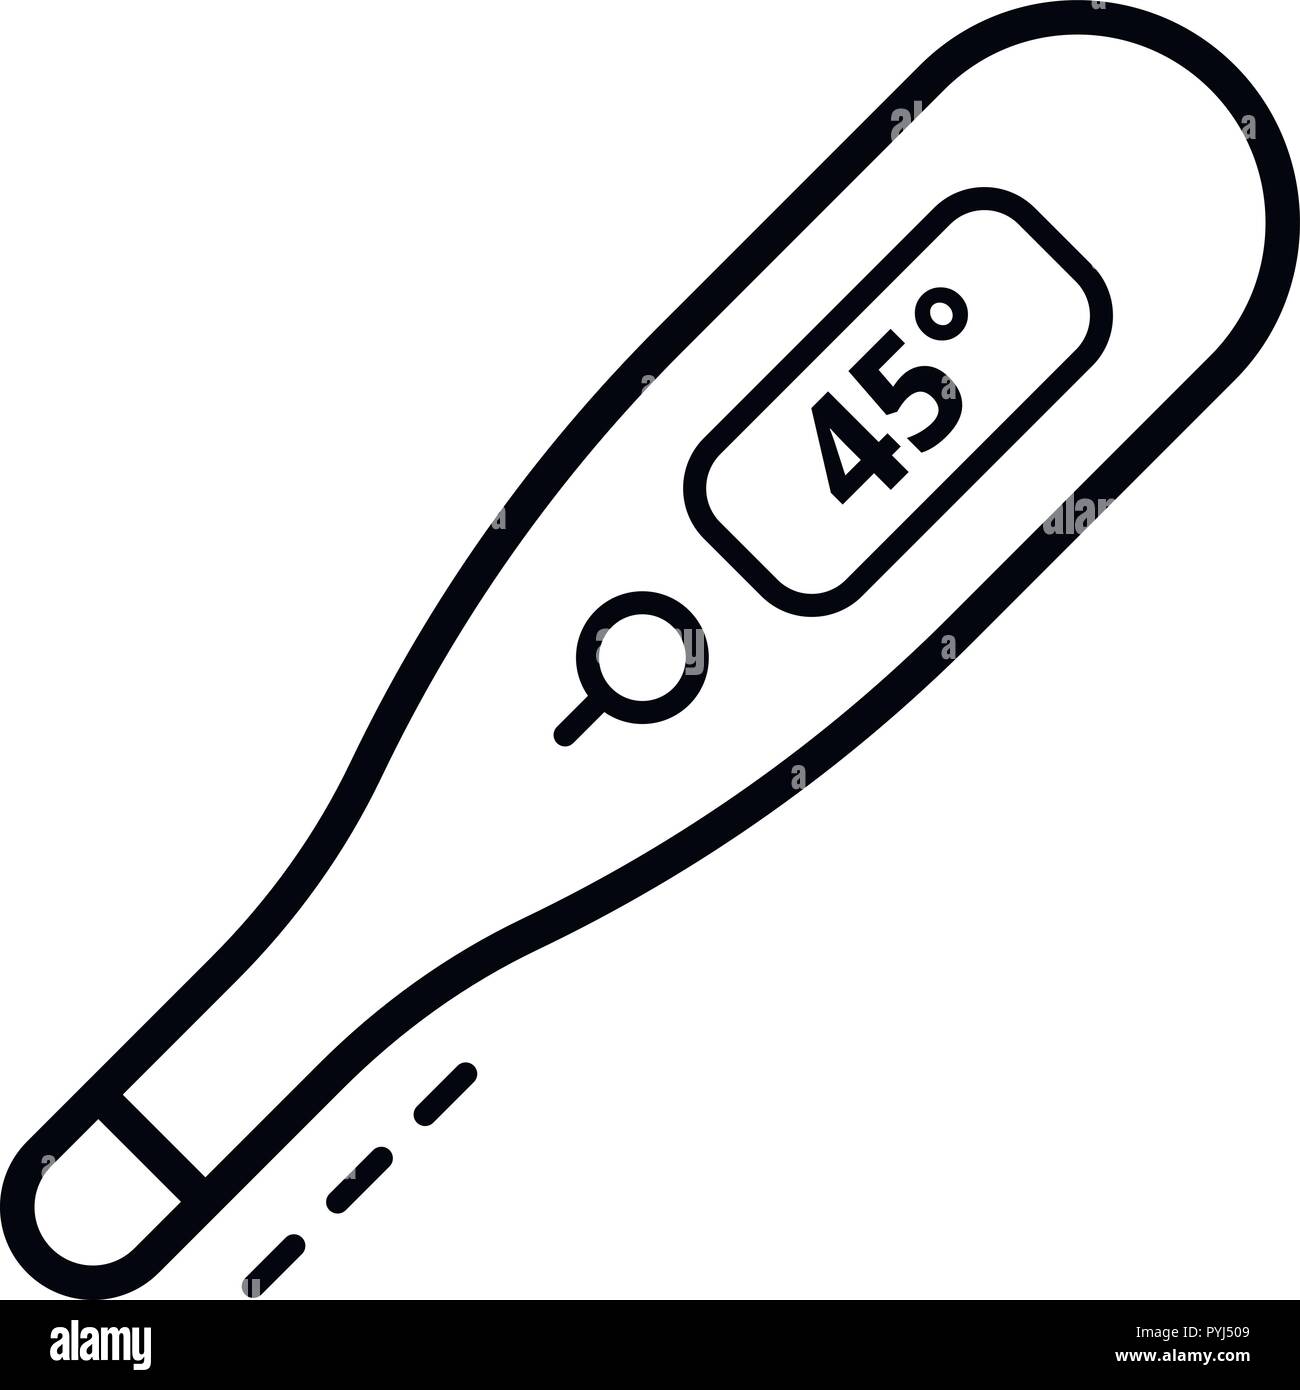 https://c8.alamy.com/comp/PYJ509/high-temperature-thermometer-icon-outline-style-PYJ509.jpg